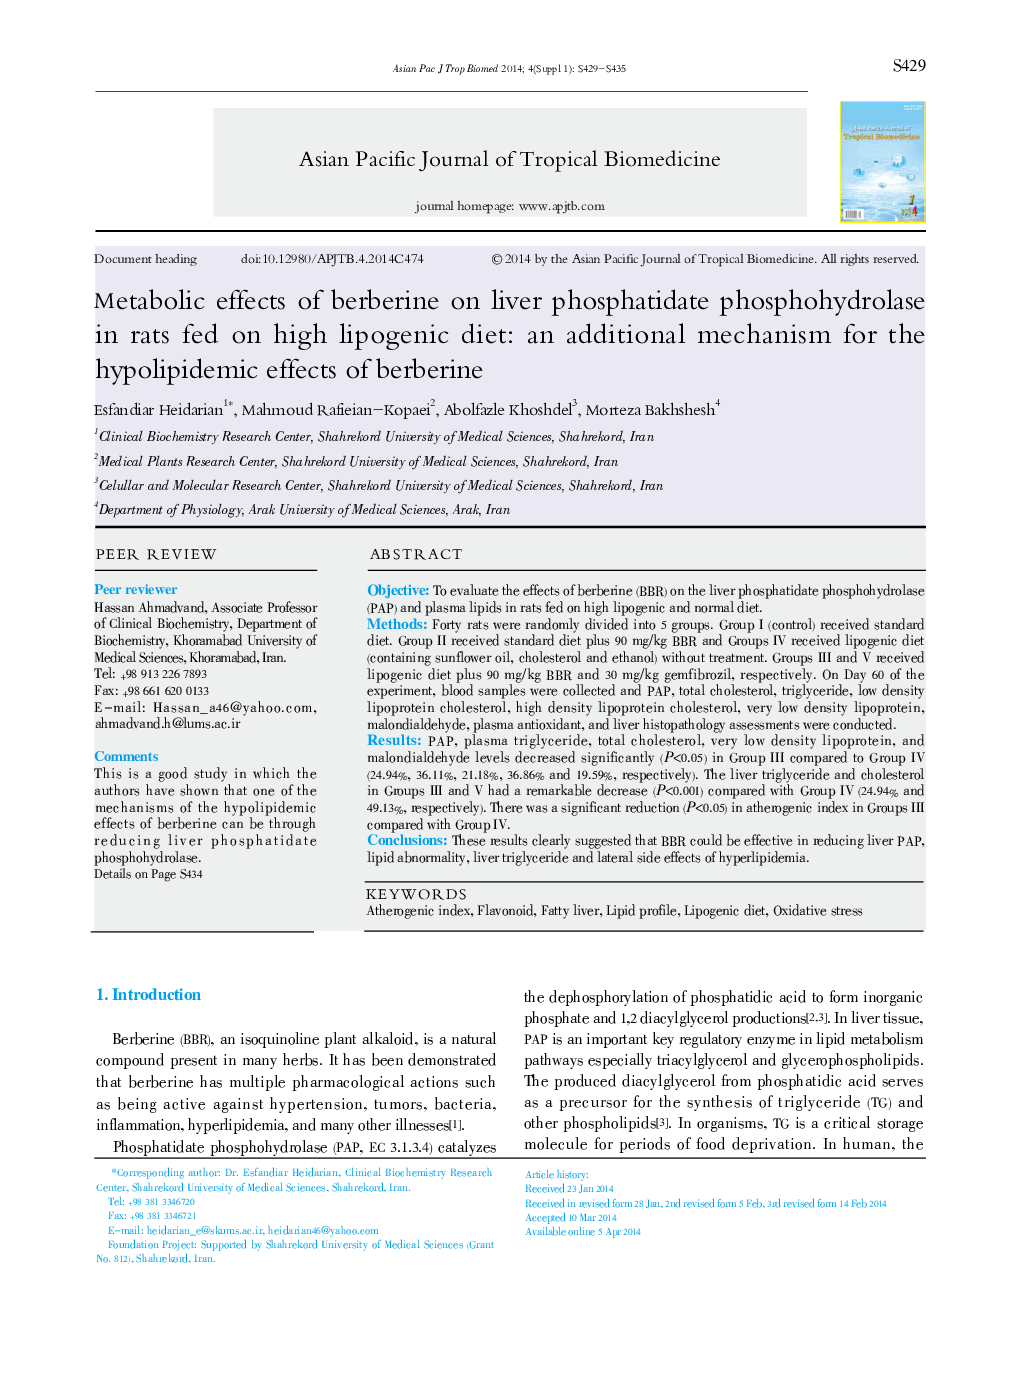 Metabolic effects of berberine on liver phosphatidate phosphohydrolase in rats fed on high lipogenic diet: an additional mechanism for the hypolipidemic effects of berberine 